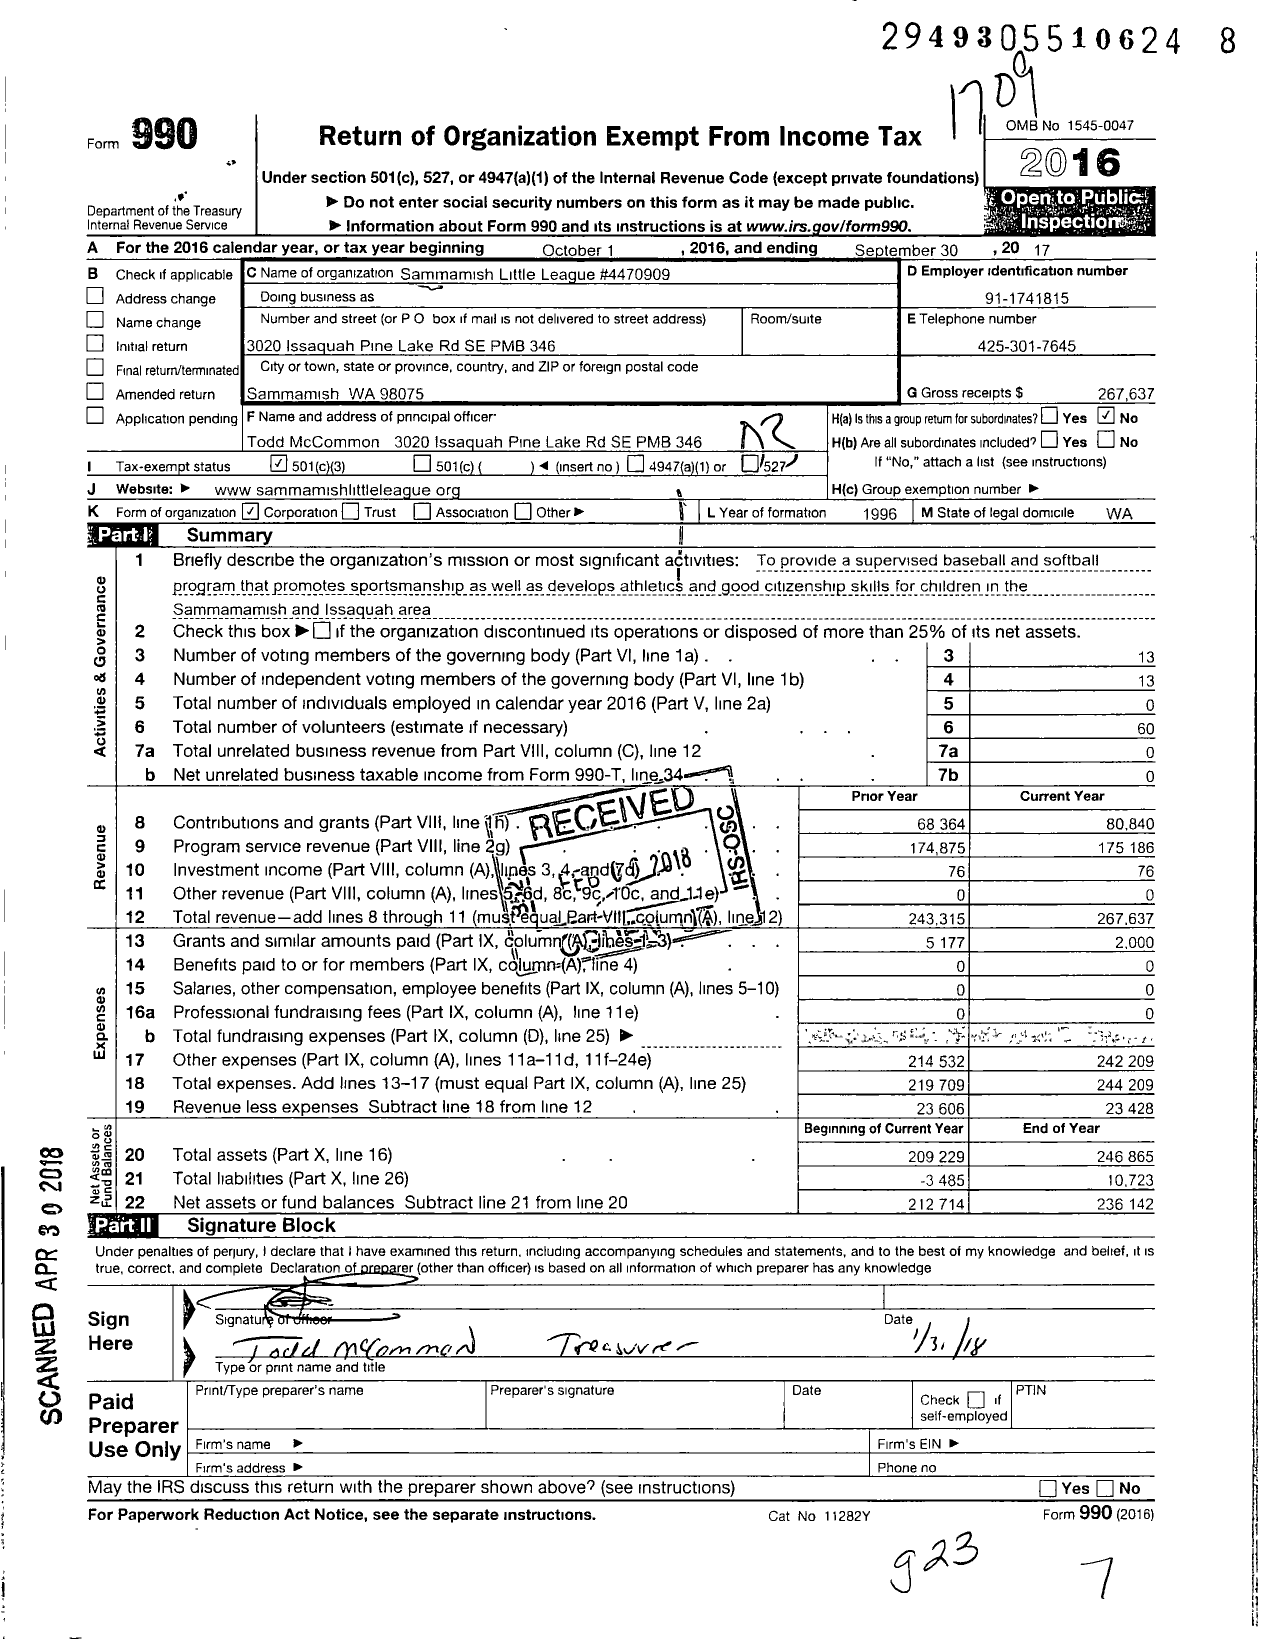 Image of first page of 2016 Form 990 for Little League Baseball - 4470909 Sammamish LL